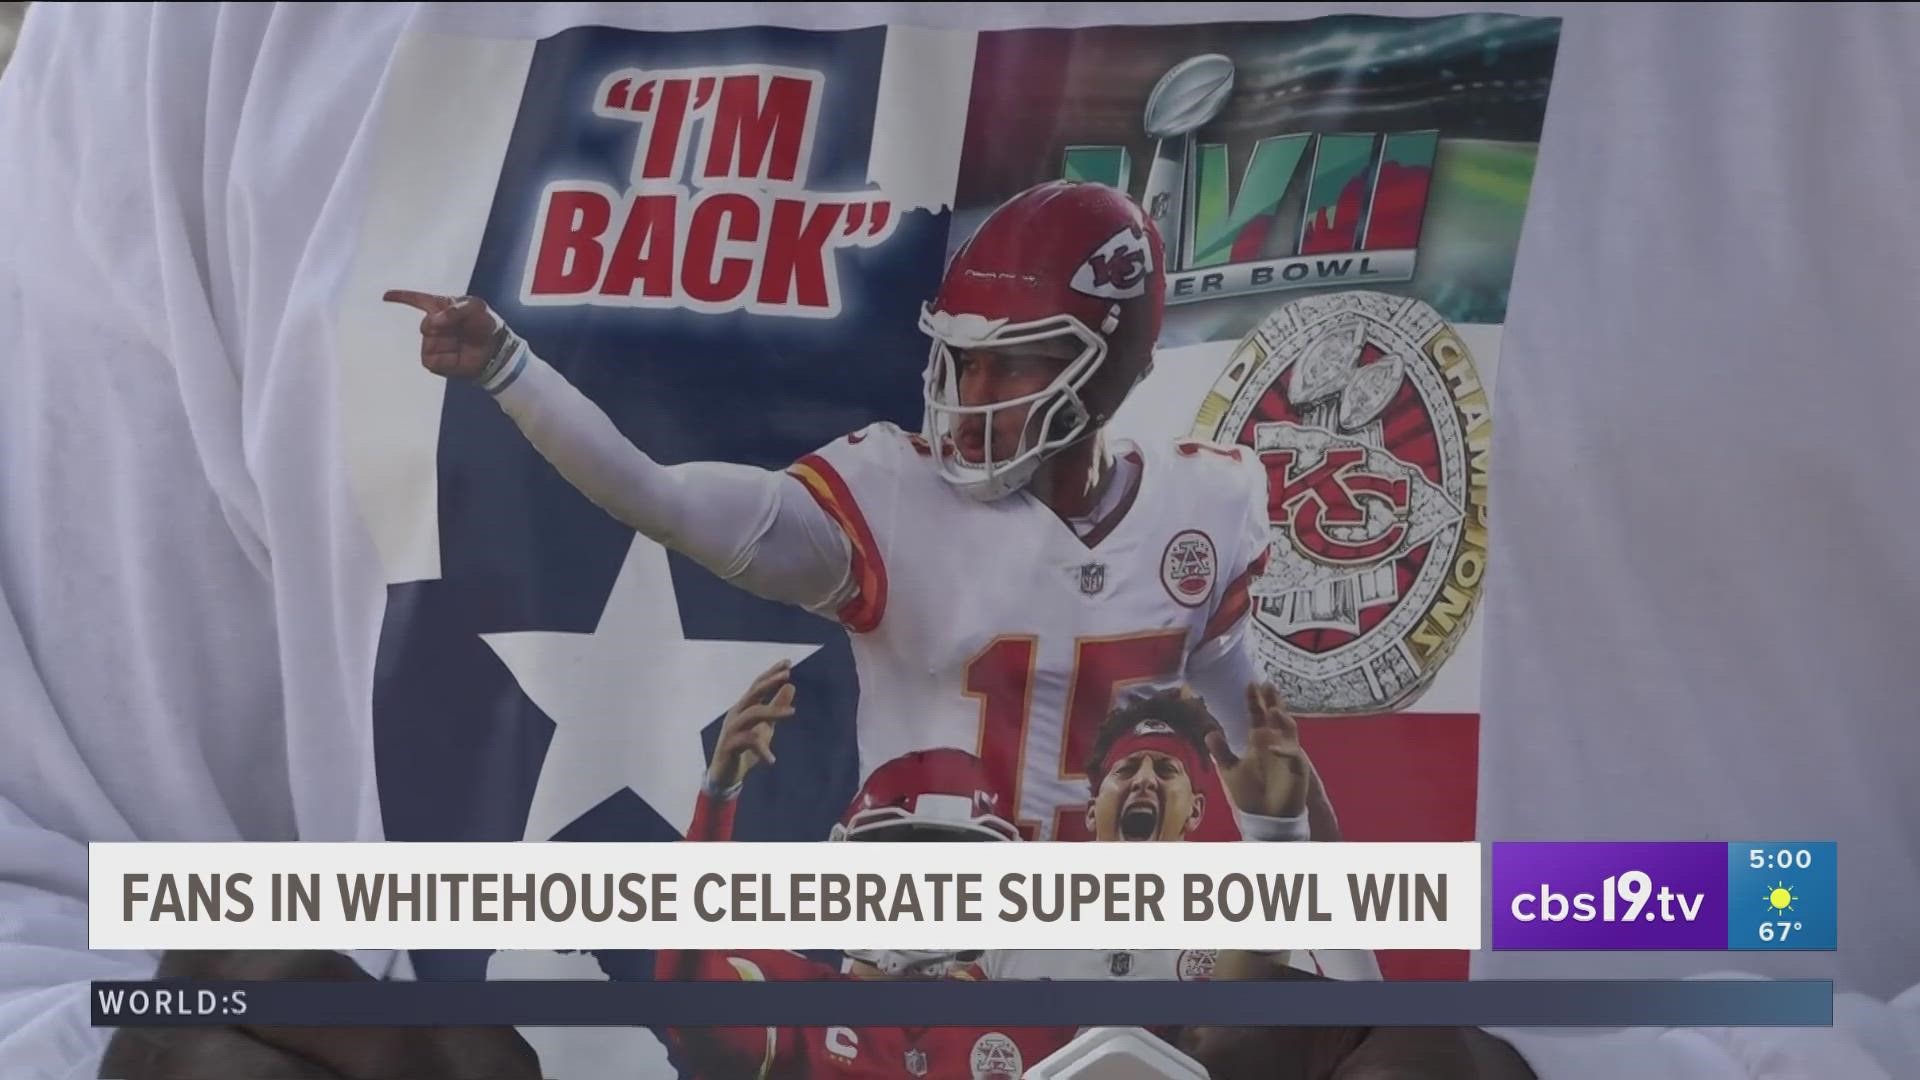 A clothing business out of Dallas, known as Small Town Heros, created T-shirts in honor of Whitehouse legend and Super Bowl champion Patrick Mahomes.